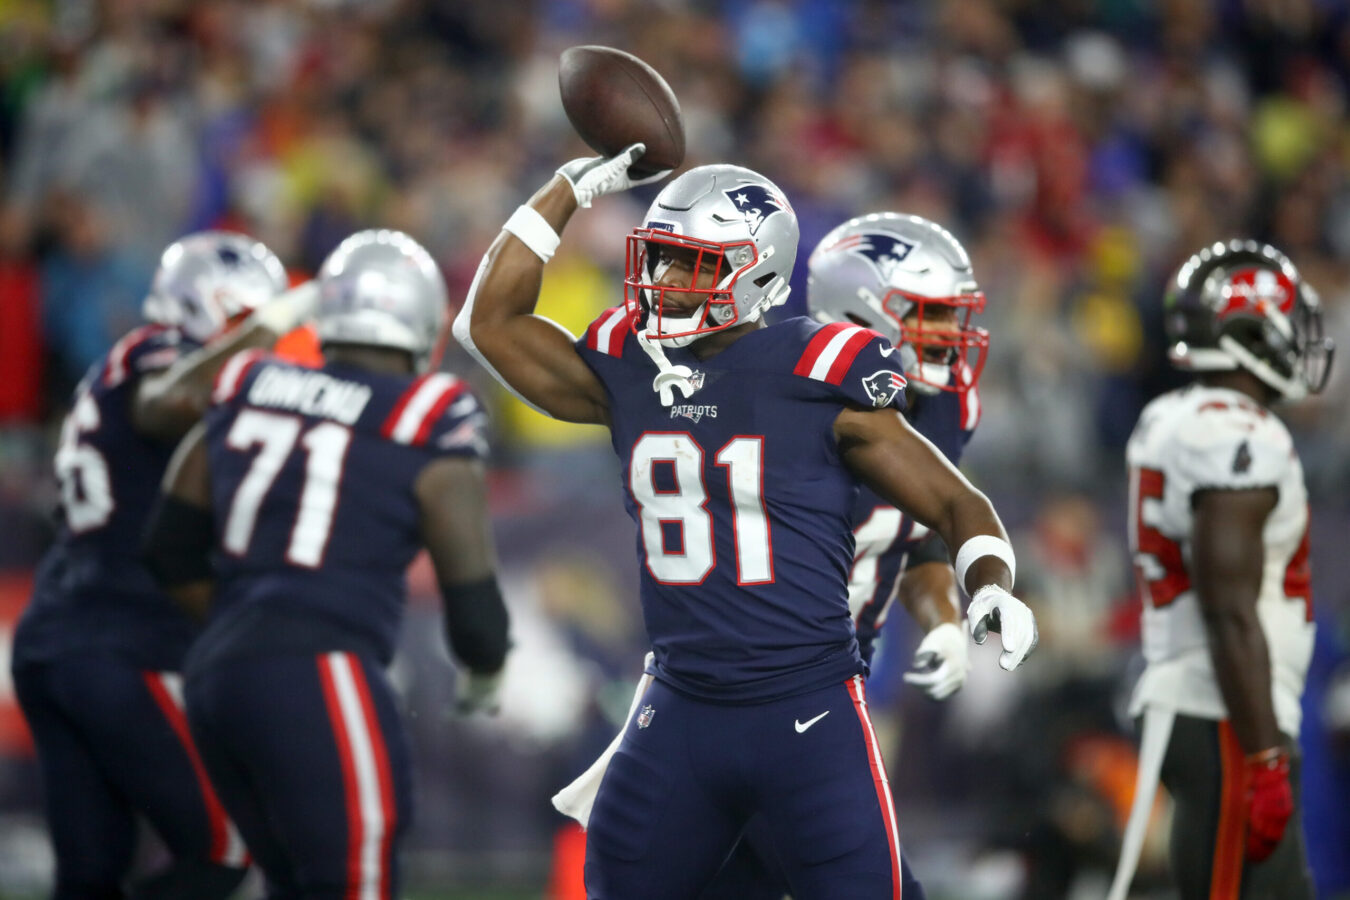 FOXBOROUGH, MASSACHUSETTS - OCTOBER 03: Jonnu Smith #81 of the New England Patriots reacts after a touchdown against the Tampa Bay Buccaneers during the fourth quarter in the game at Gillette Stadium on October 03, 2021 in Foxborough, Massachusetts. (Photo by Adam Glanzman/Getty Images)